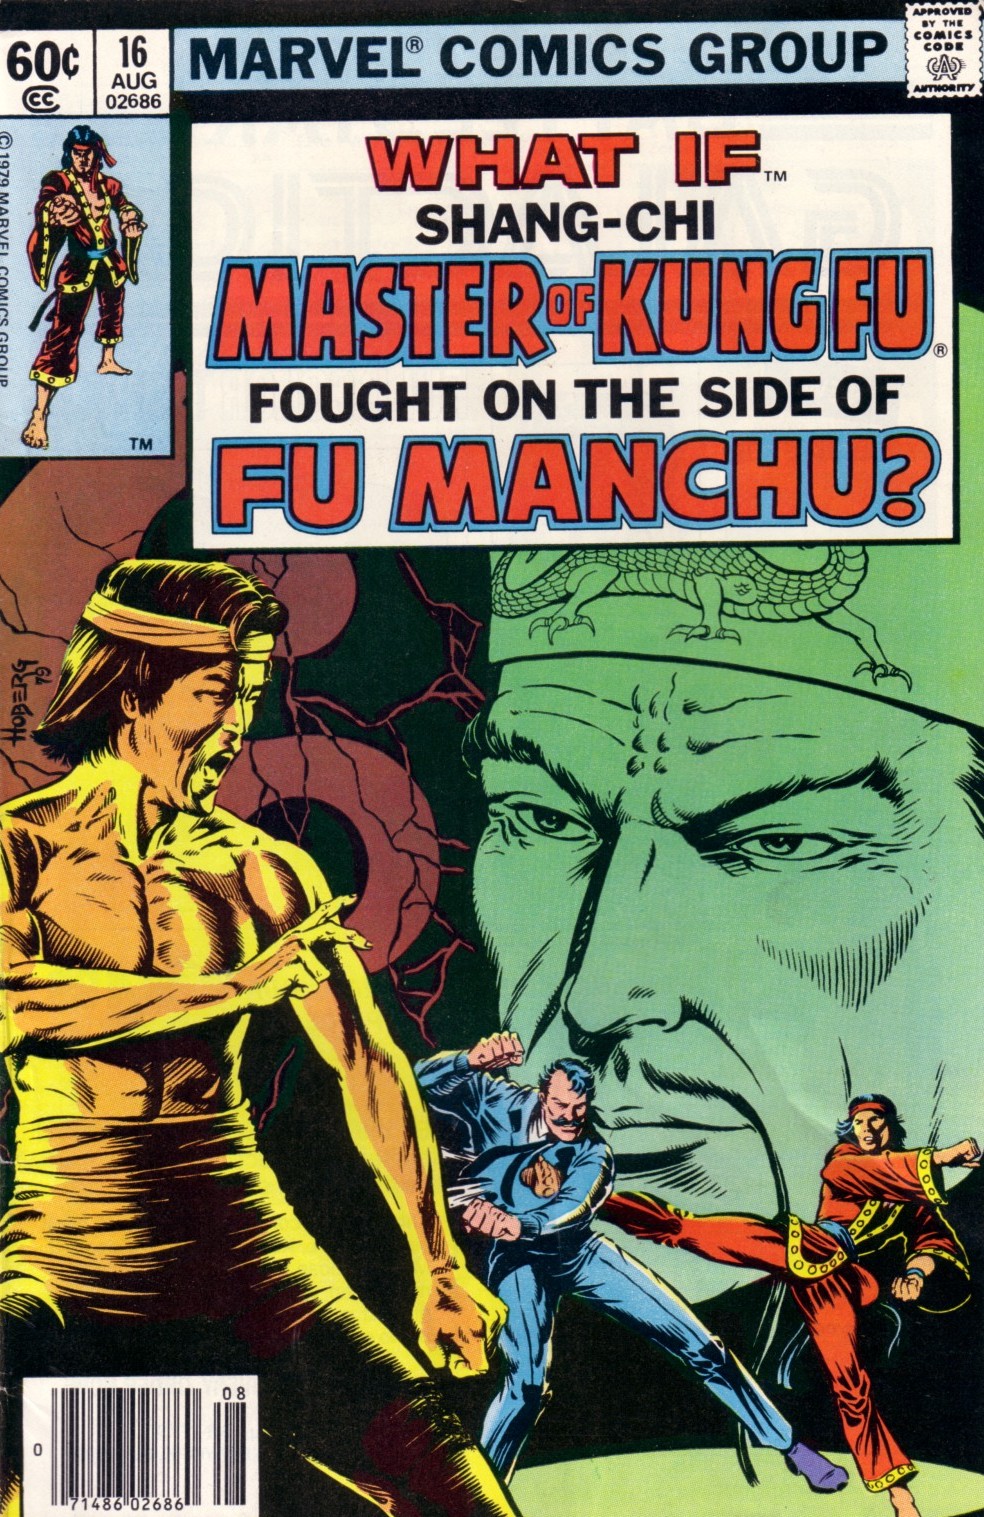 Read online What If? (1977) comic -  Issue #16 - Shang Chi Master of Kung Fu fought on The side of Fu Manchu - 1